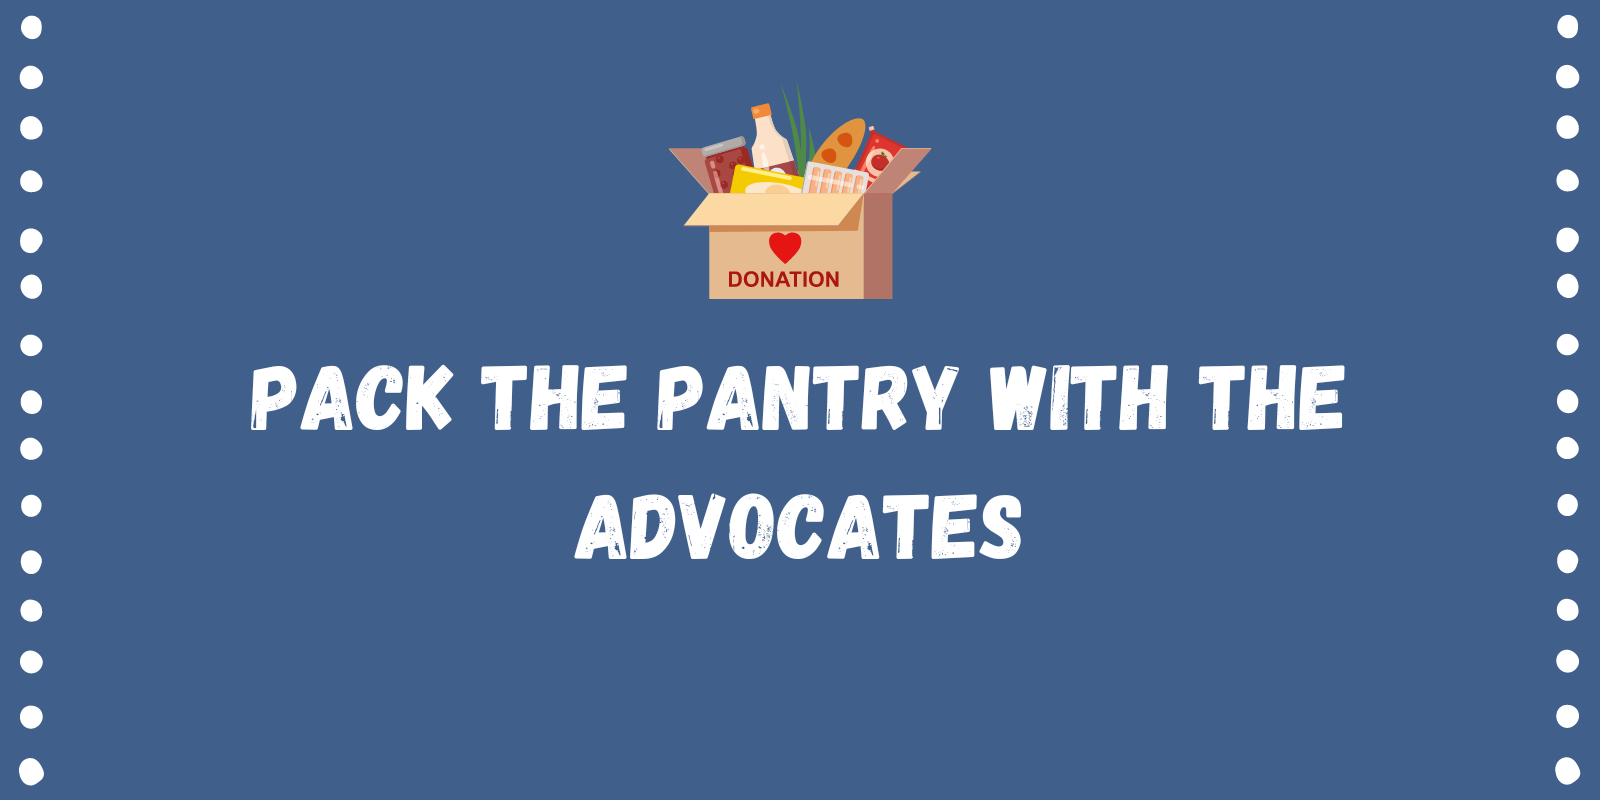 Pack the Pantry with the Advocates